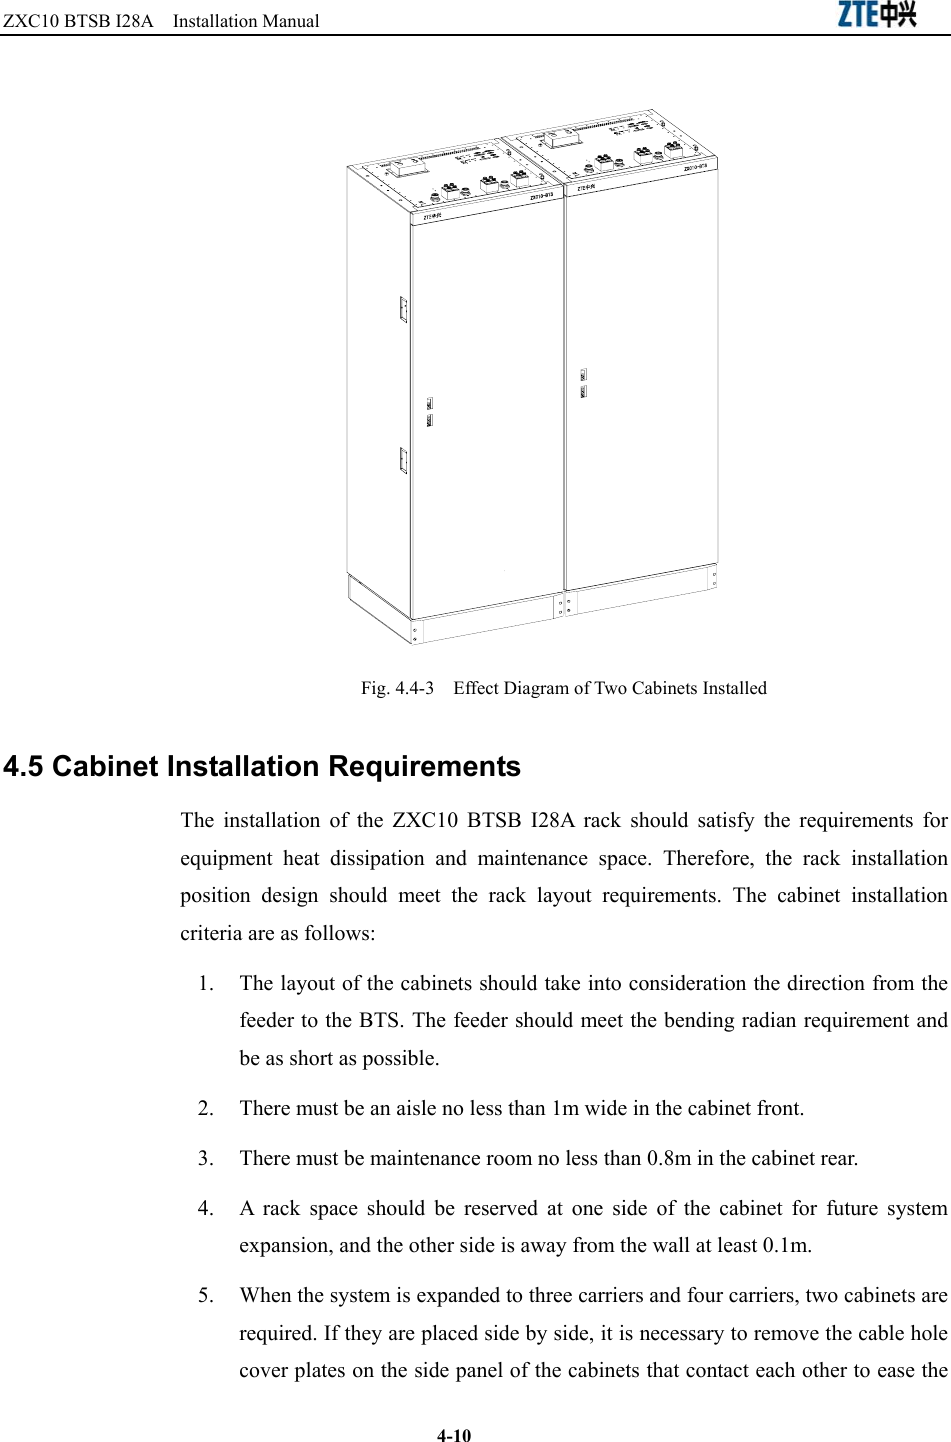 ZXC10 BTSB I28A  Installation Manual                                                          4-10  Fig. 4.4-3  Effect Diagram of Two Cabinets Installed 4.5 Cabinet Installation Requirements The installation of the ZXC10 BTSB I28A rack should satisfy the requirements for equipment heat dissipation and maintenance space. Therefore, the rack installation position design should meet the rack layout requirements. The cabinet installation criteria are as follows: 1.  The layout of the cabinets should take into consideration the direction from the feeder to the BTS. The feeder should meet the bending radian requirement and be as short as possible. 2.  There must be an aisle no less than 1m wide in the cabinet front. 3.  There must be maintenance room no less than 0.8m in the cabinet rear. 4.  A rack space should be reserved at one side of the cabinet for future system expansion, and the other side is away from the wall at least 0.1m. 5.  When the system is expanded to three carriers and four carriers, two cabinets are required. If they are placed side by side, it is necessary to remove the cable hole cover plates on the side panel of the cabinets that contact each other to ease the 